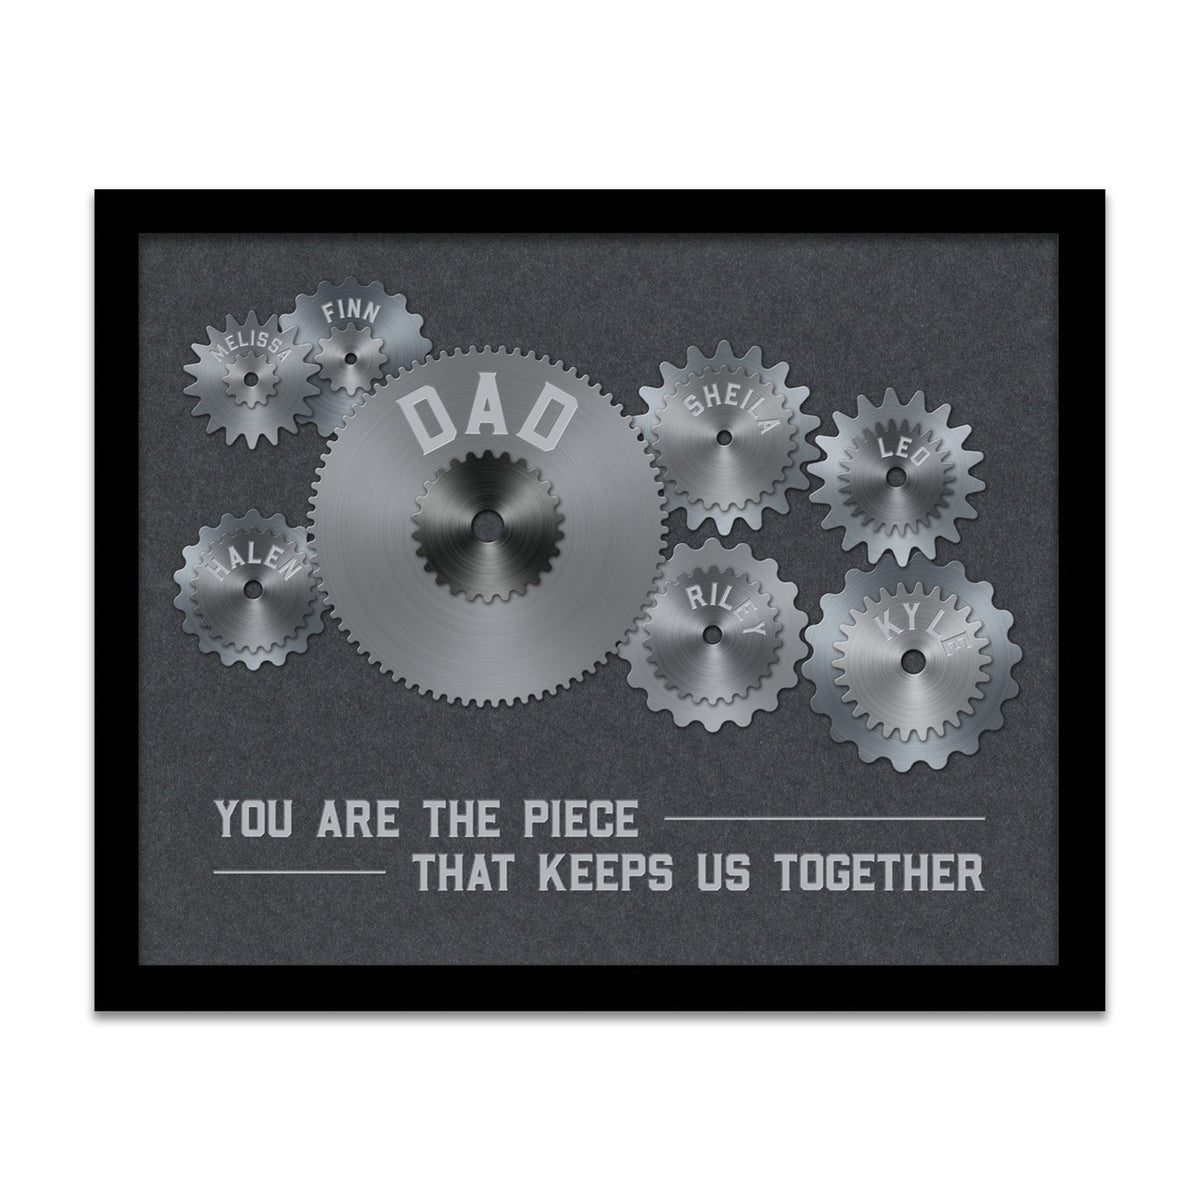 Personalized Framed Canvas Art for Dad on Father&#39;s Day